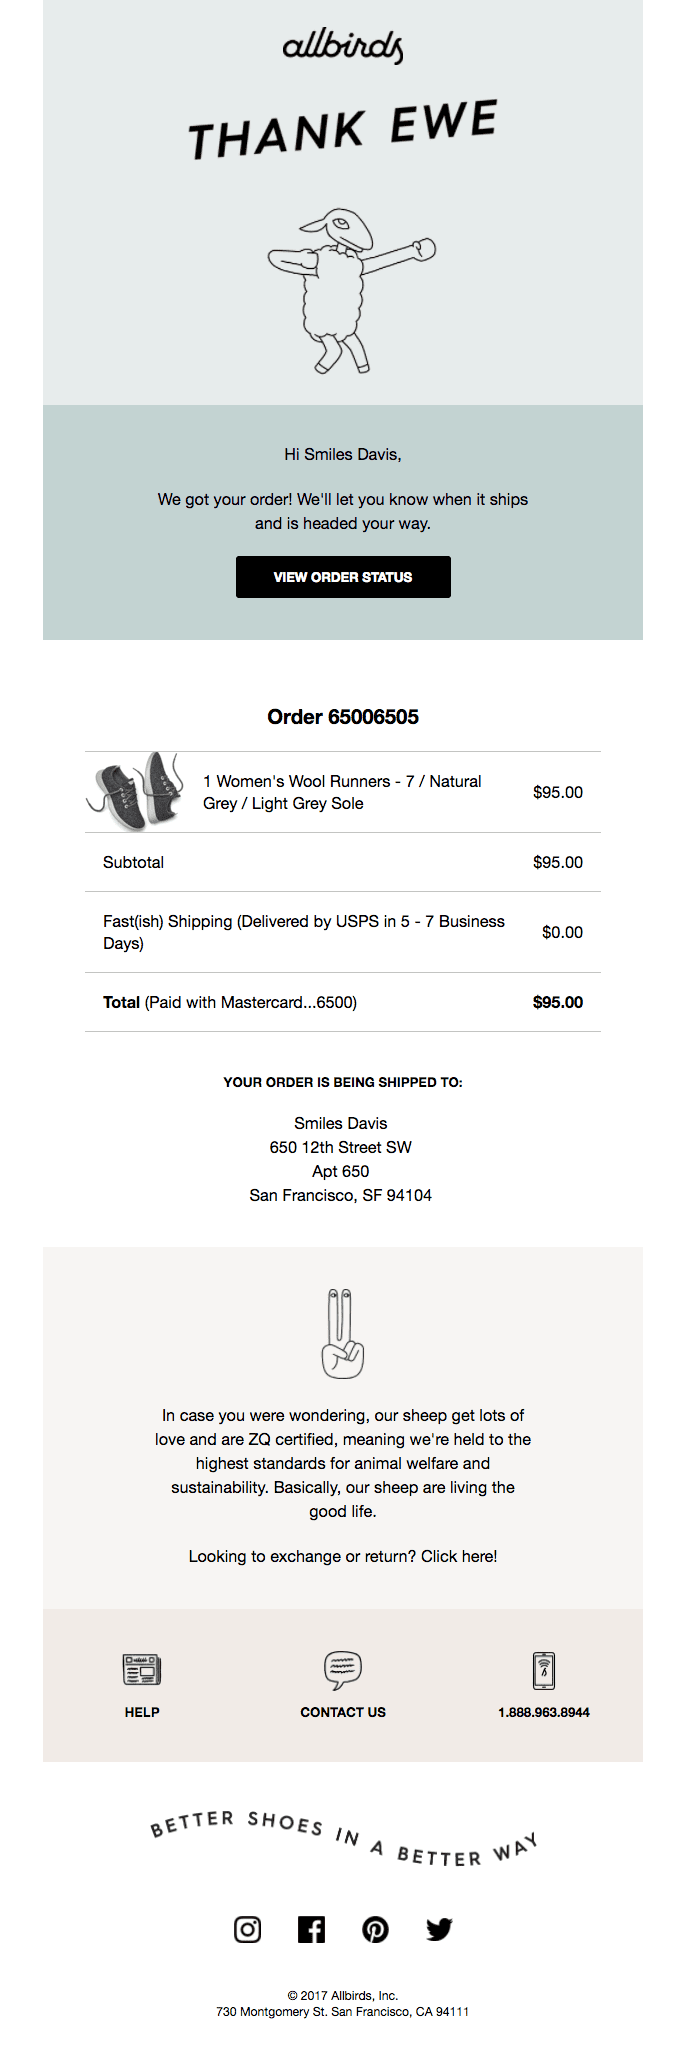 order confirmation example by allbirds